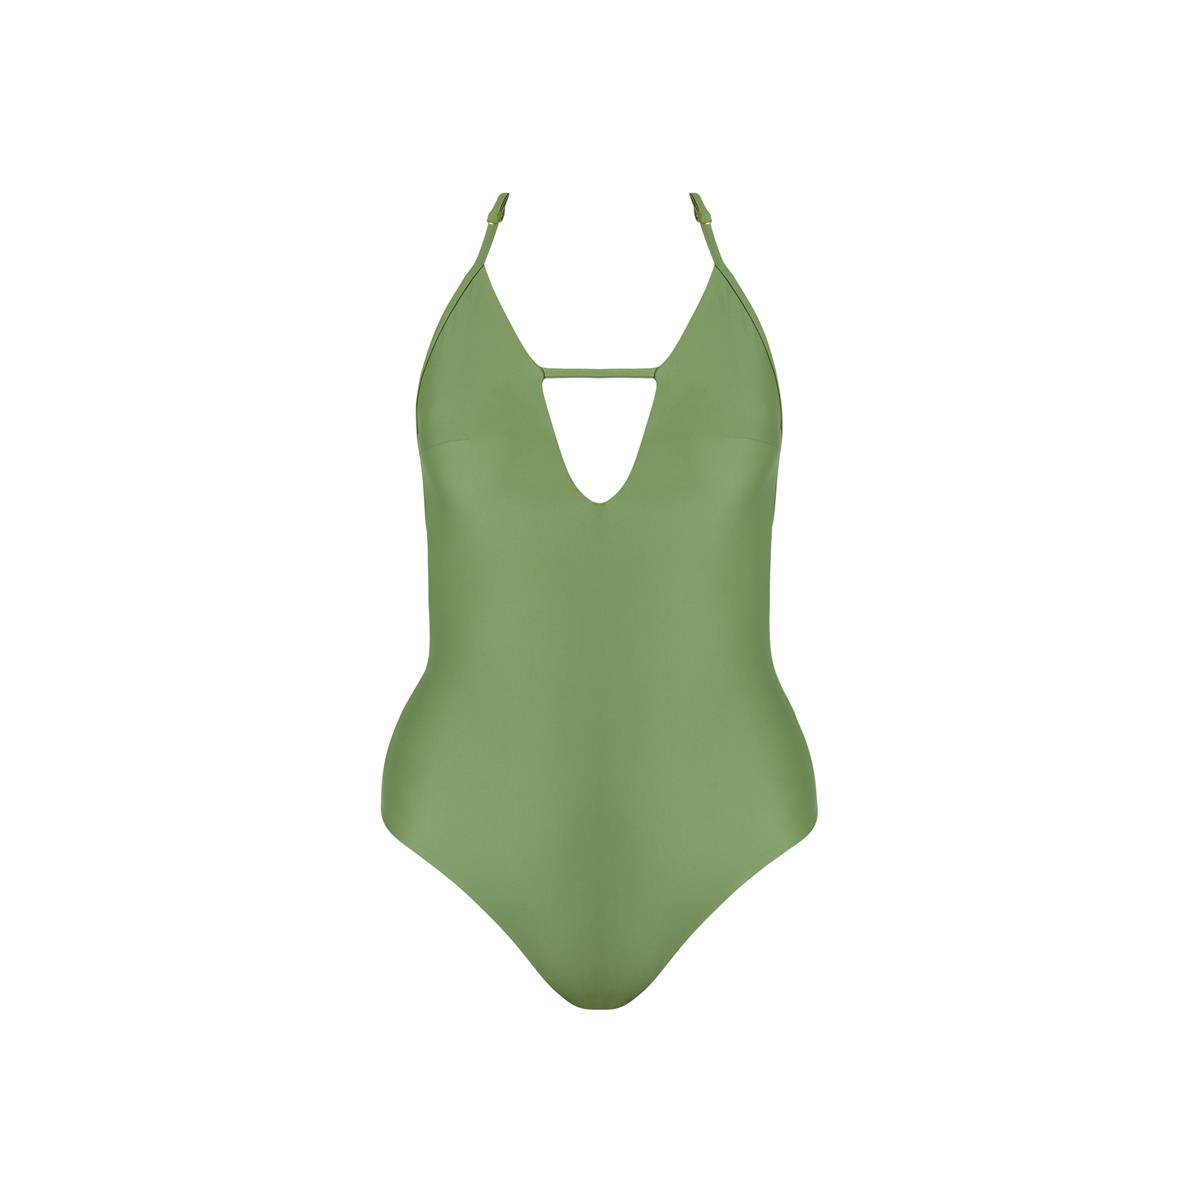 MARGARET AND HERMIONE_SS18_Swimsuit No.2_green_EUR 154,00